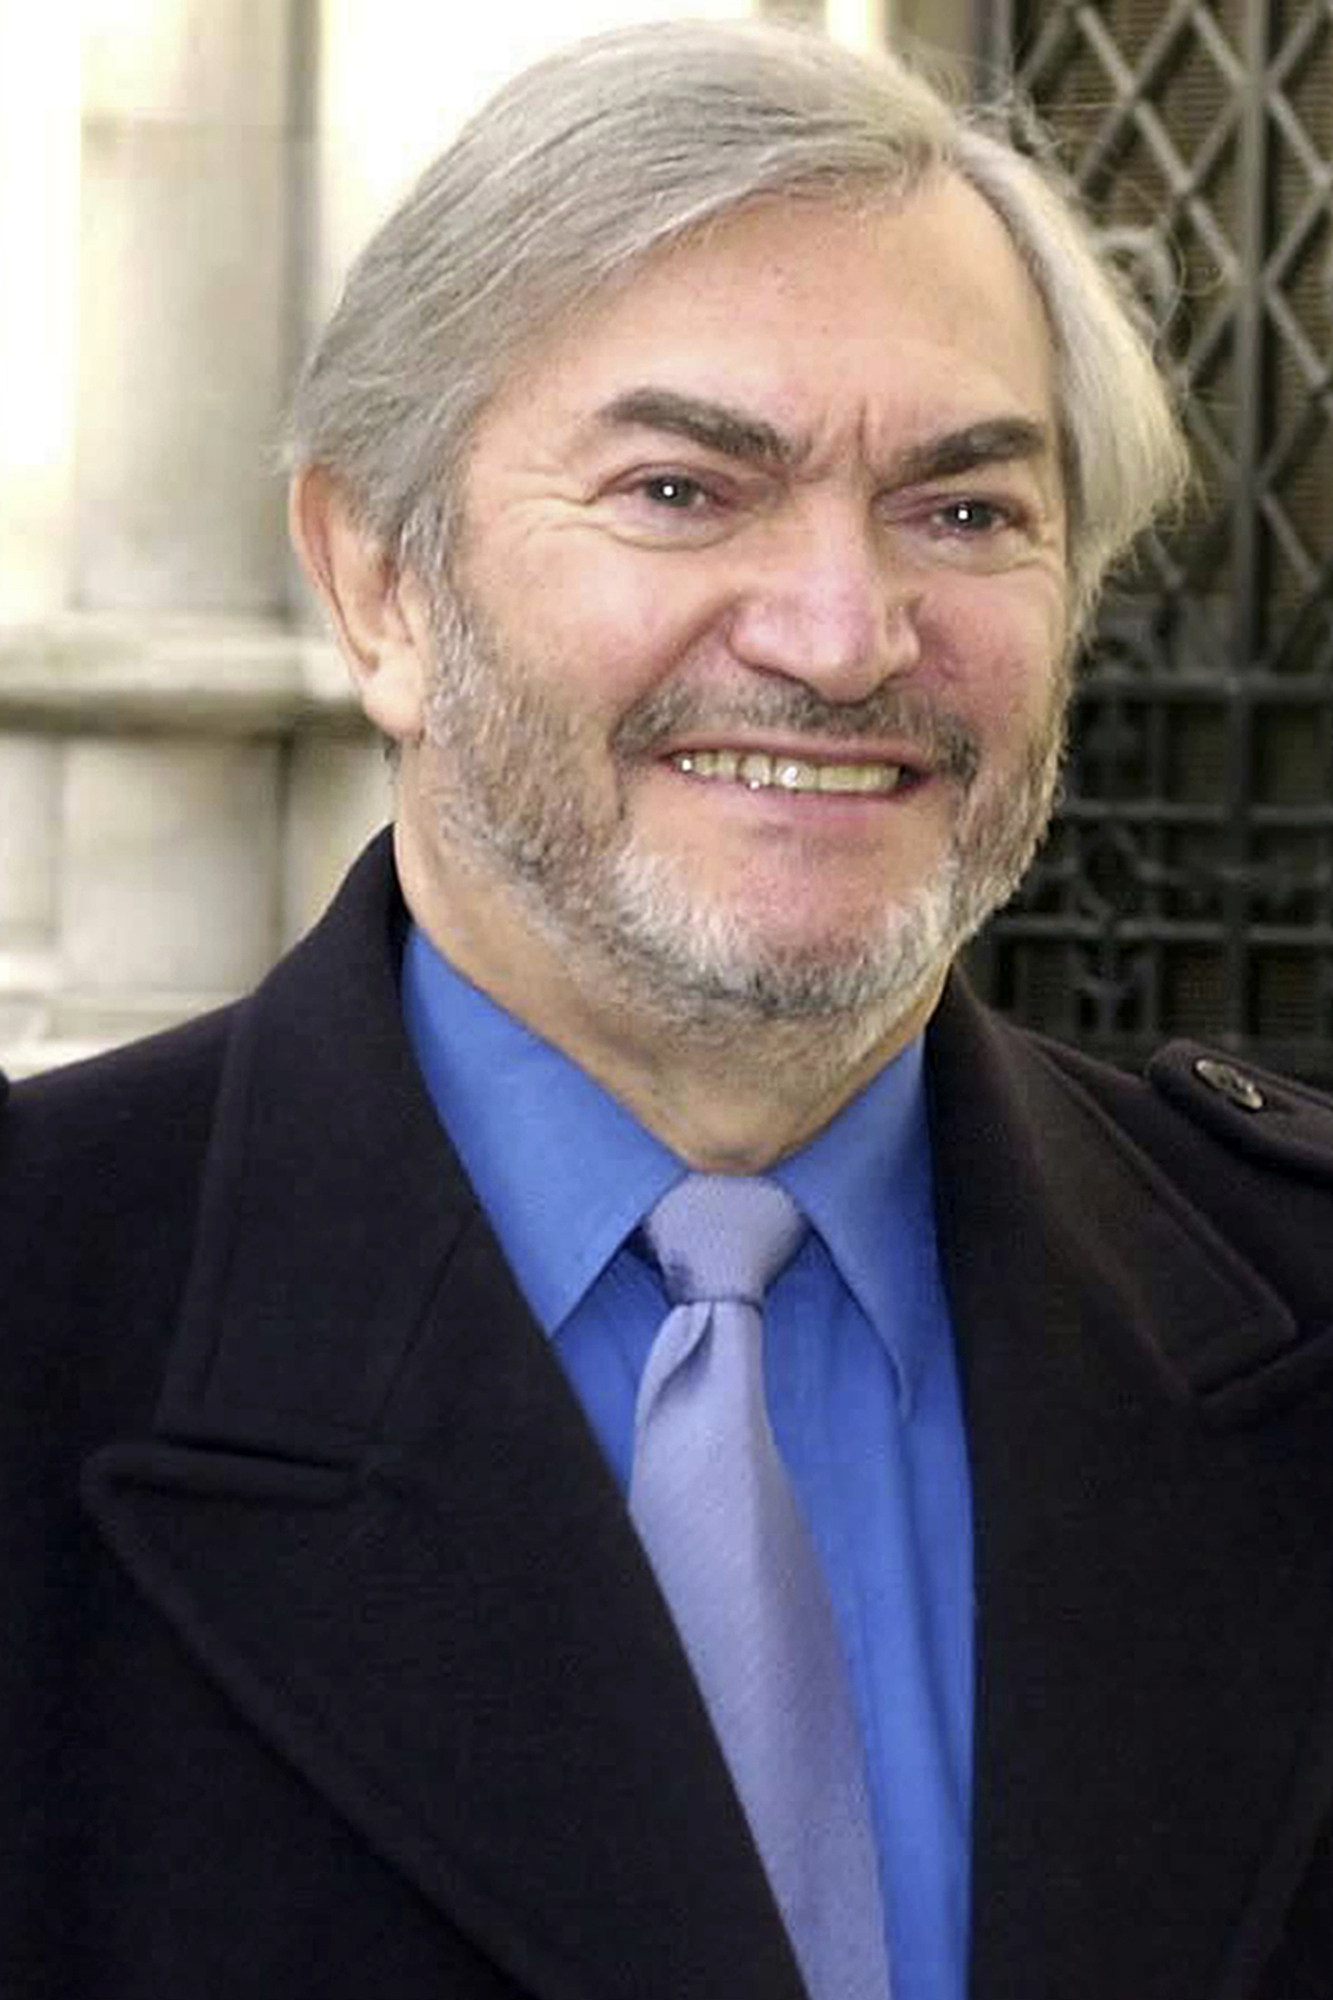 British composer Monty Norman is seen in a March 2001 photo. Photo: PA via AP